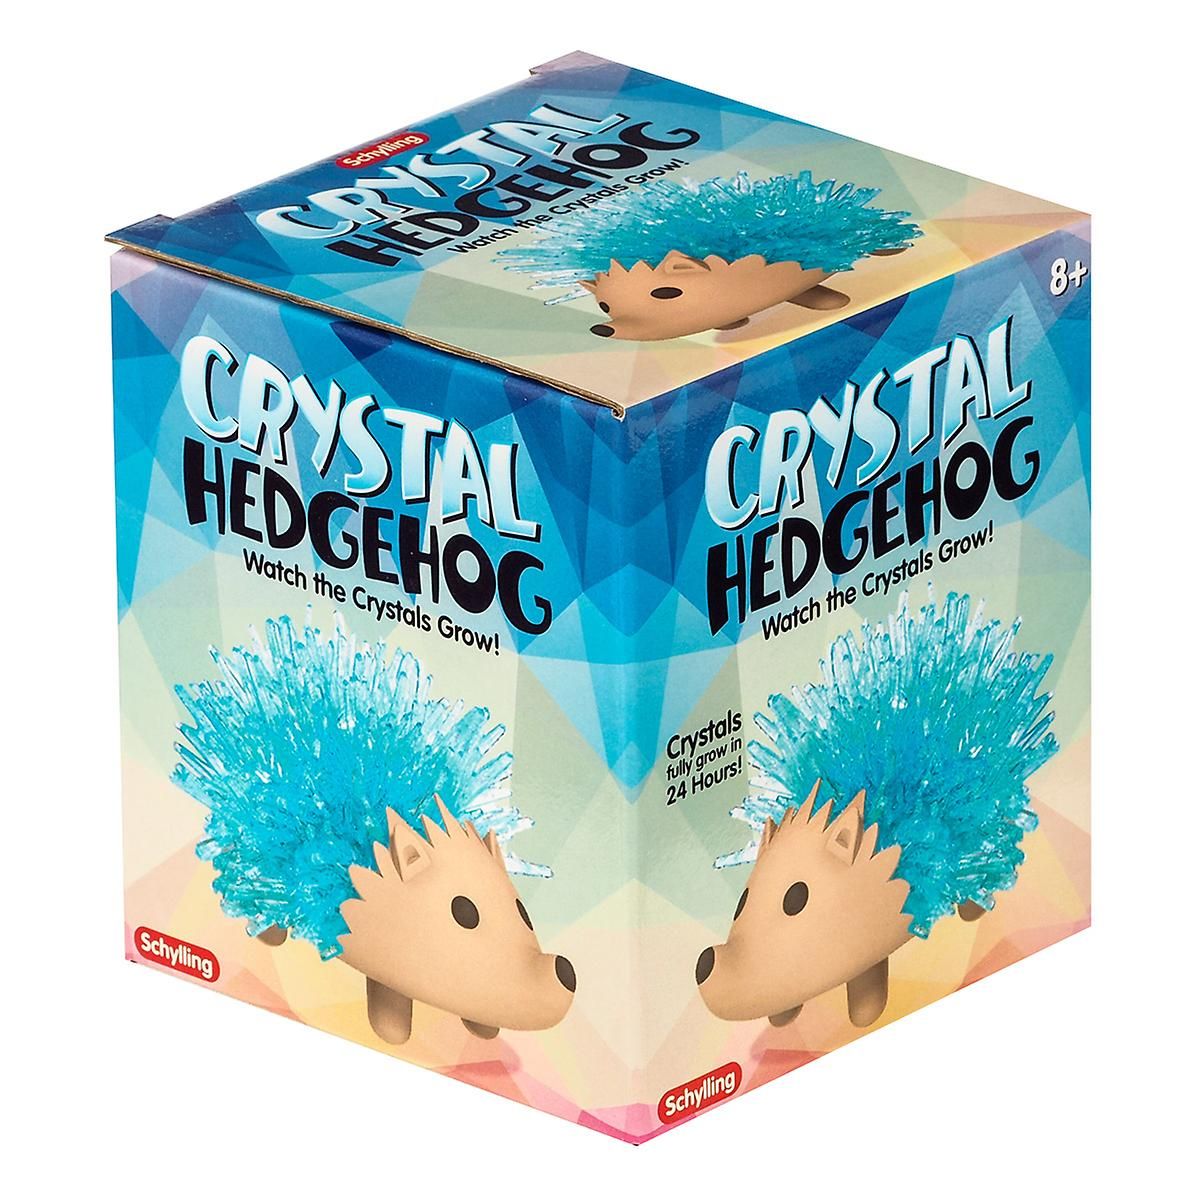 Assorted Crystal Hedgehog | The Container Store